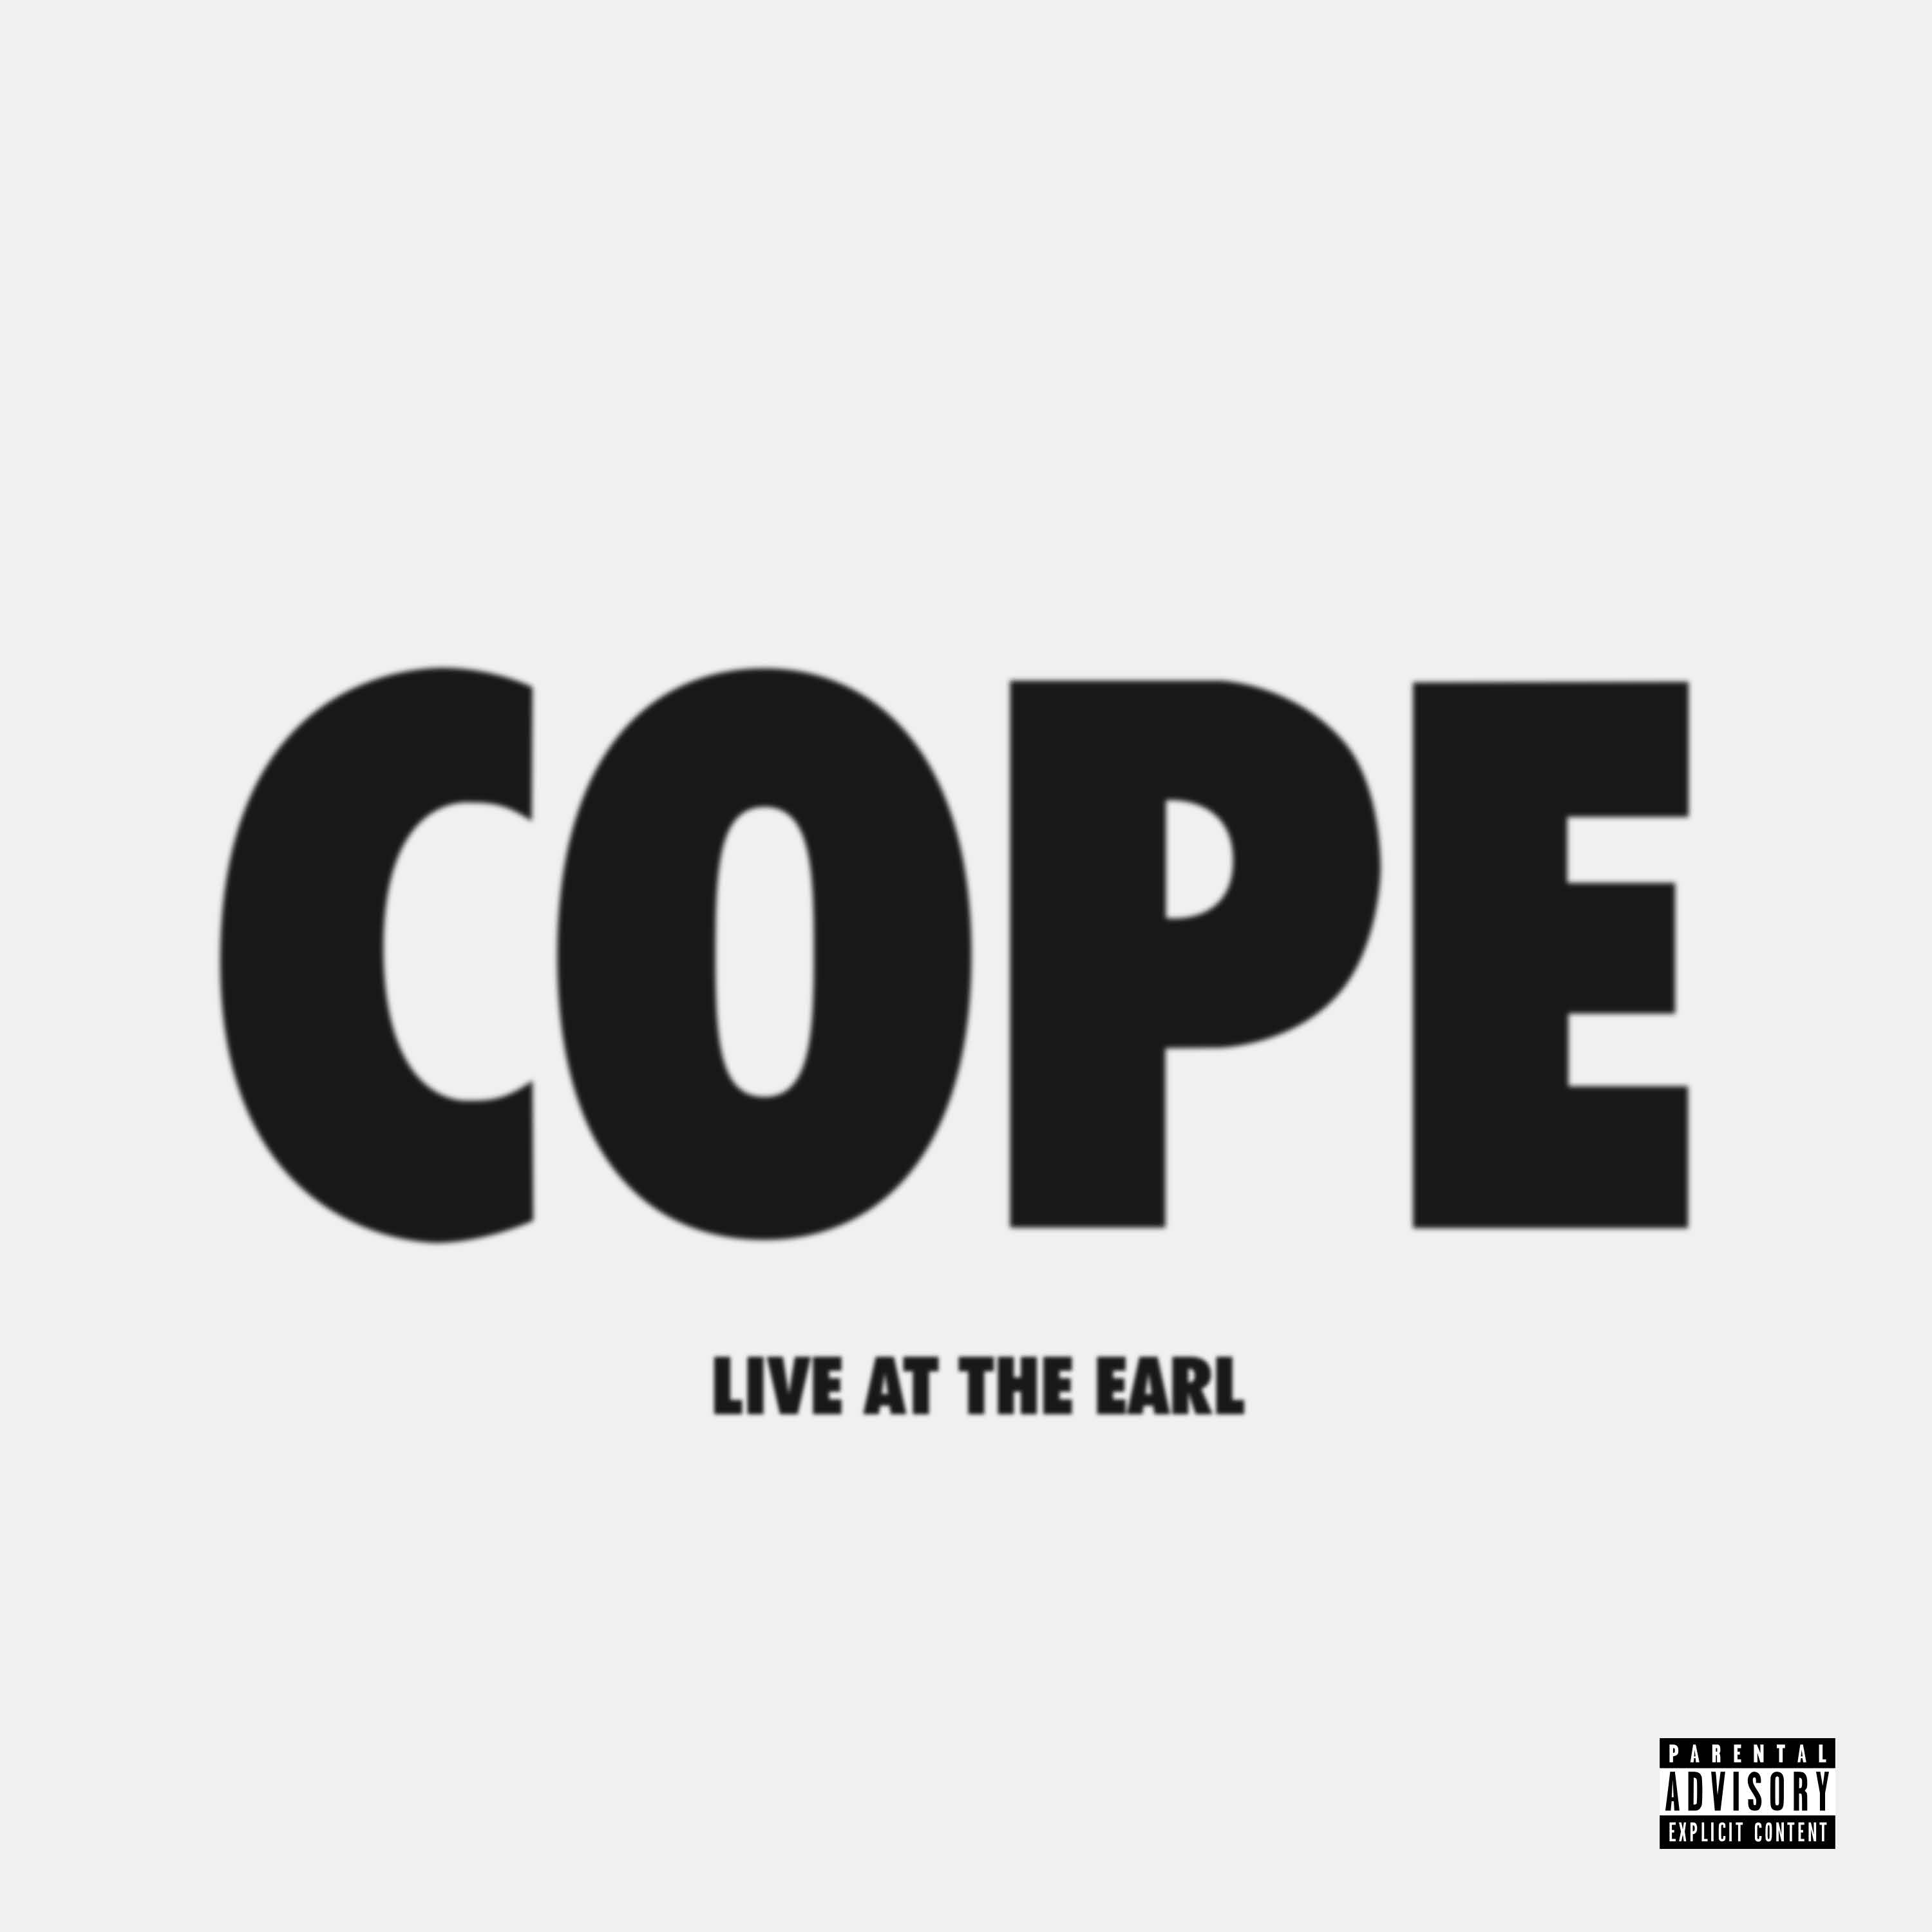 Manchester Orchestra - COPE - Live at The Earl: Limited Clear Vinyl LP